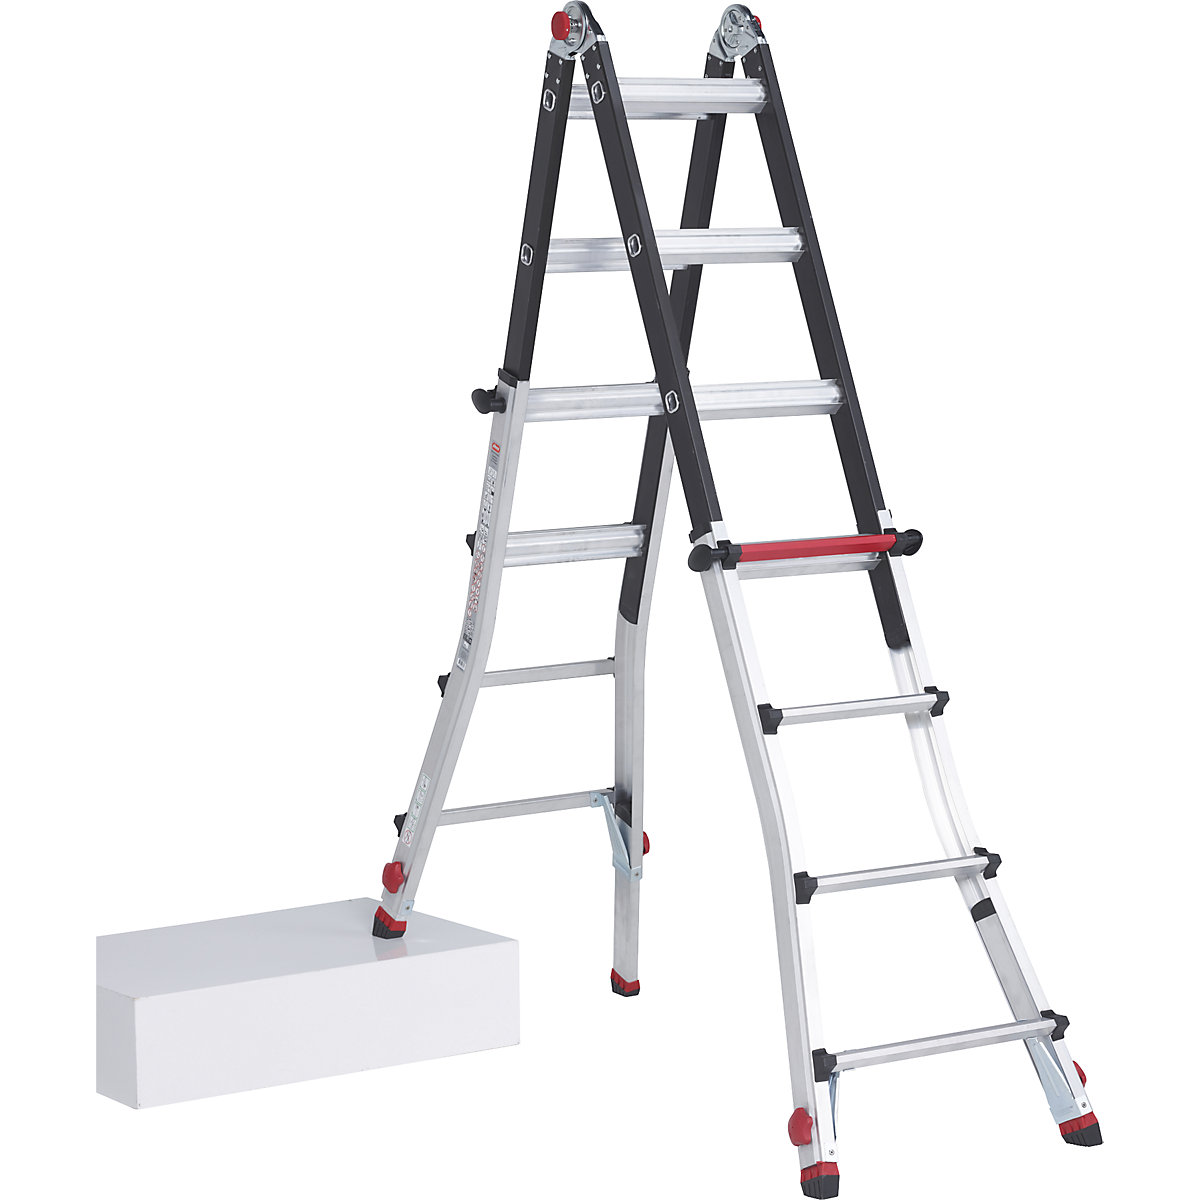 Altrex – Telescopic folding ladder, can be used as a step ladder or lean to ladder, with 4 adjustable feet, 4 x 4 rungs